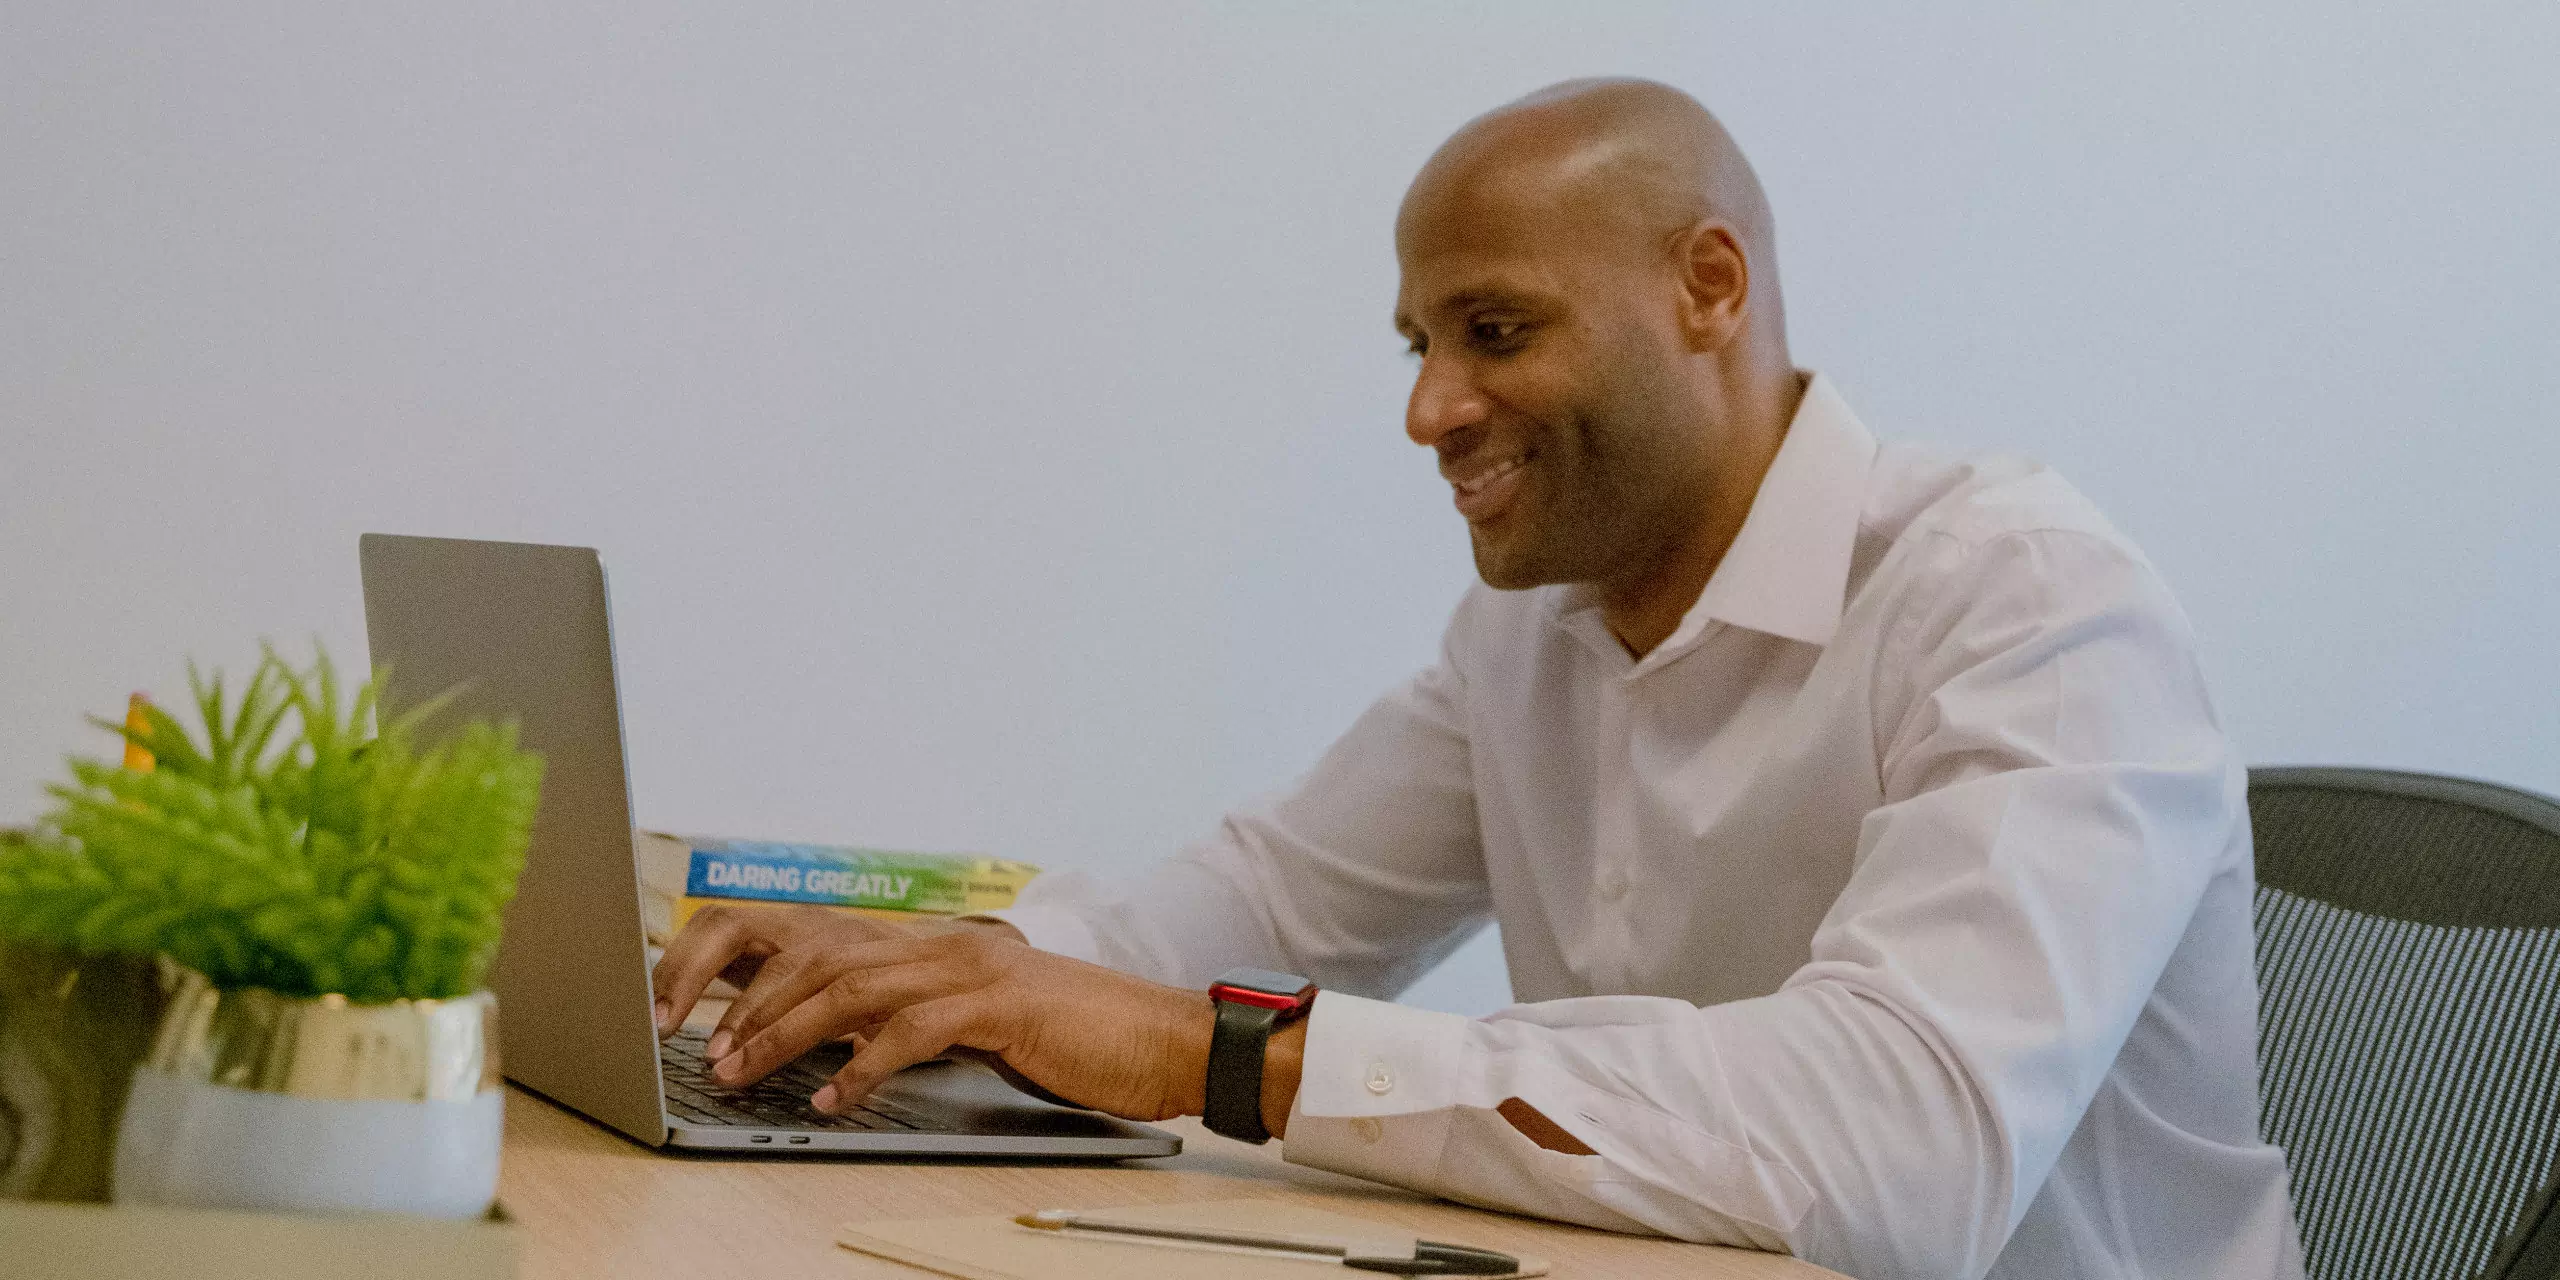 A man wearing smartwatch working on his laptop smiling